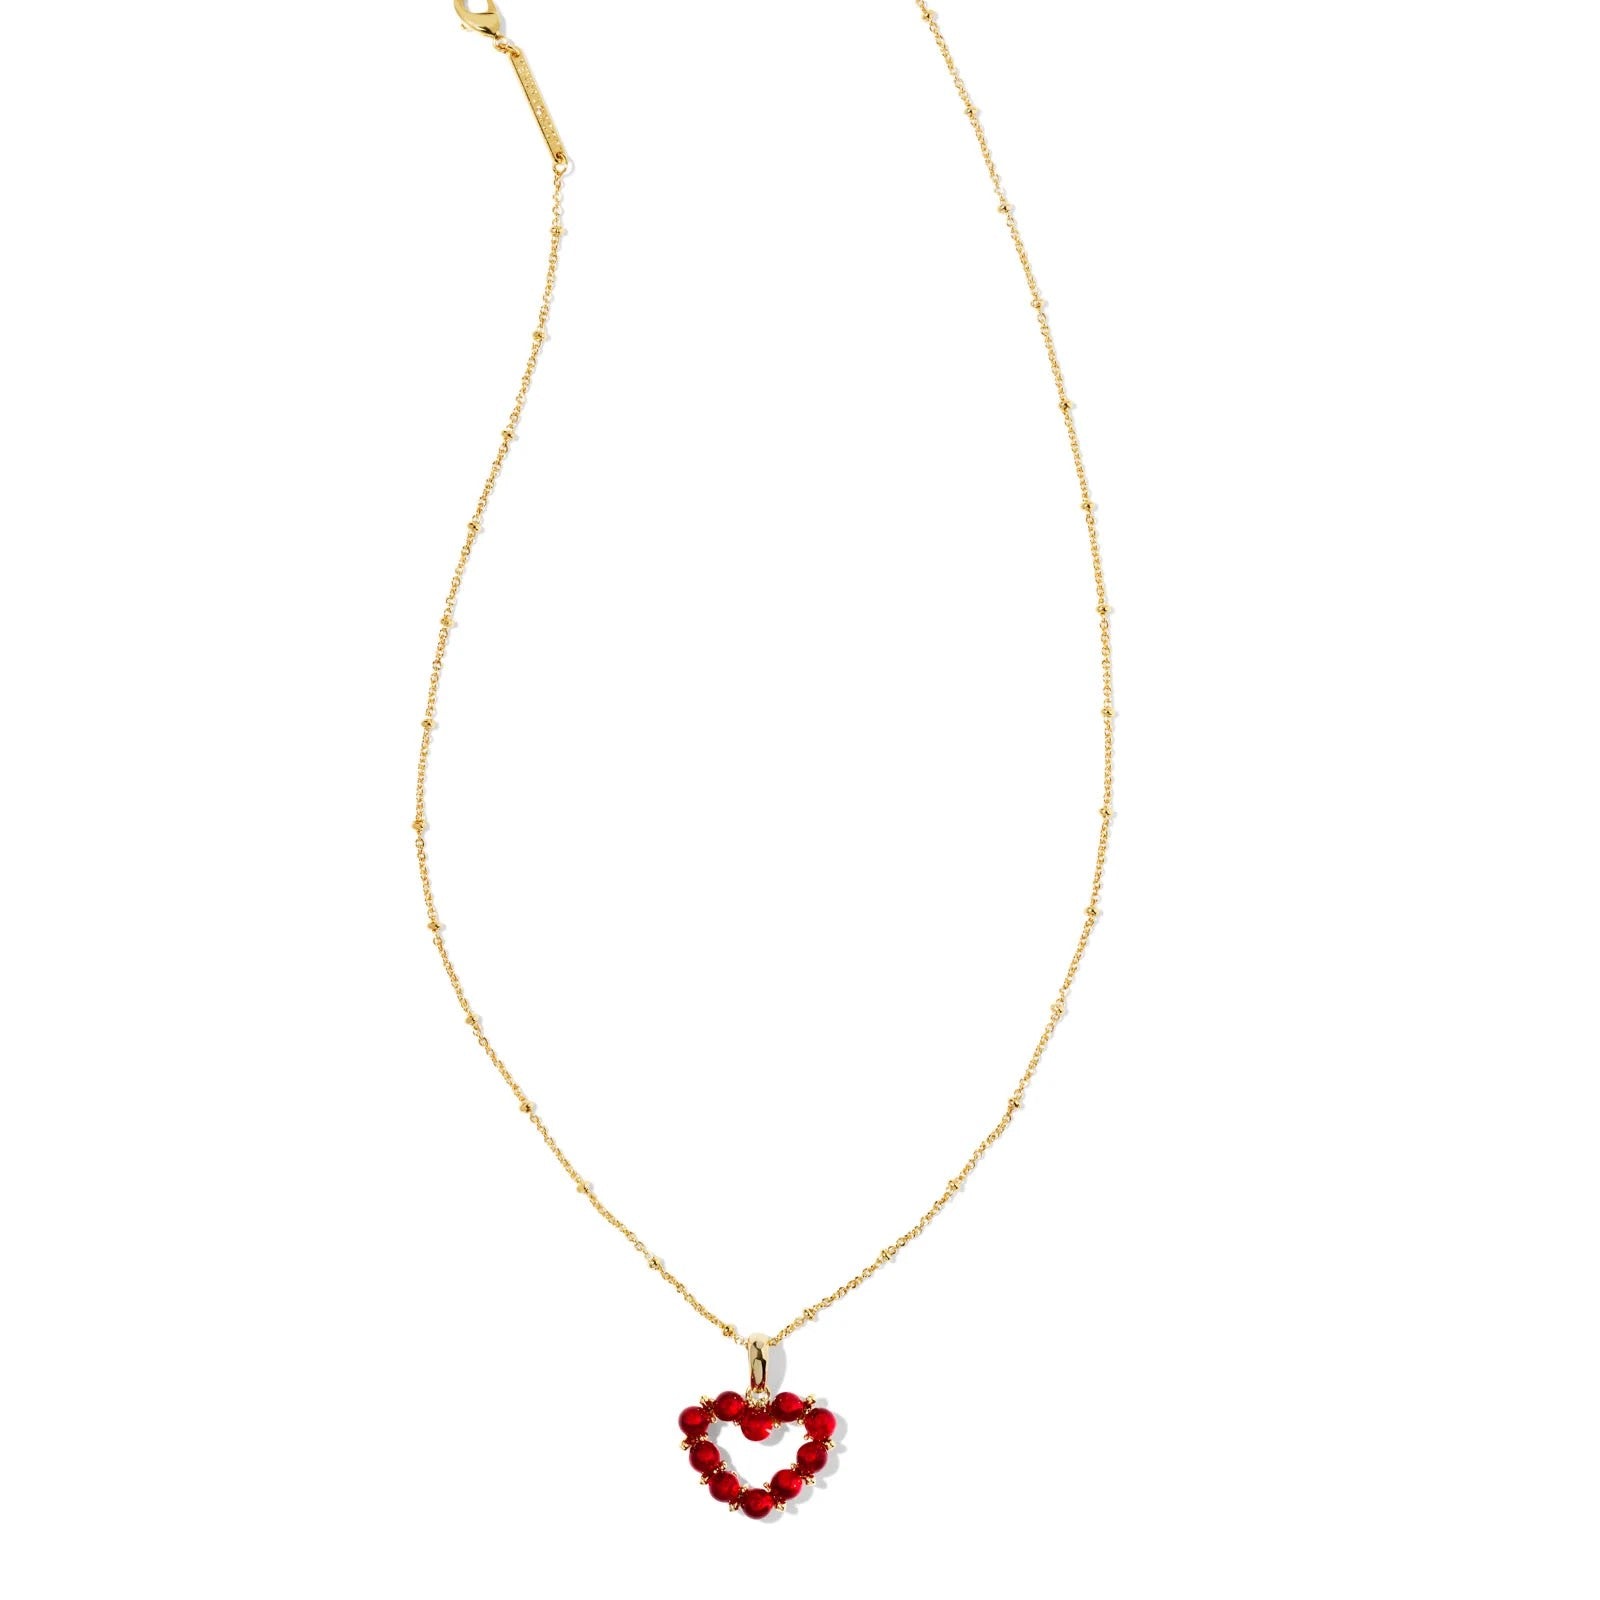 Kendra Scott | Ashton Gold Heart Short Pendant Necklace in Red Glass - Giddy Up Glamour Boutique